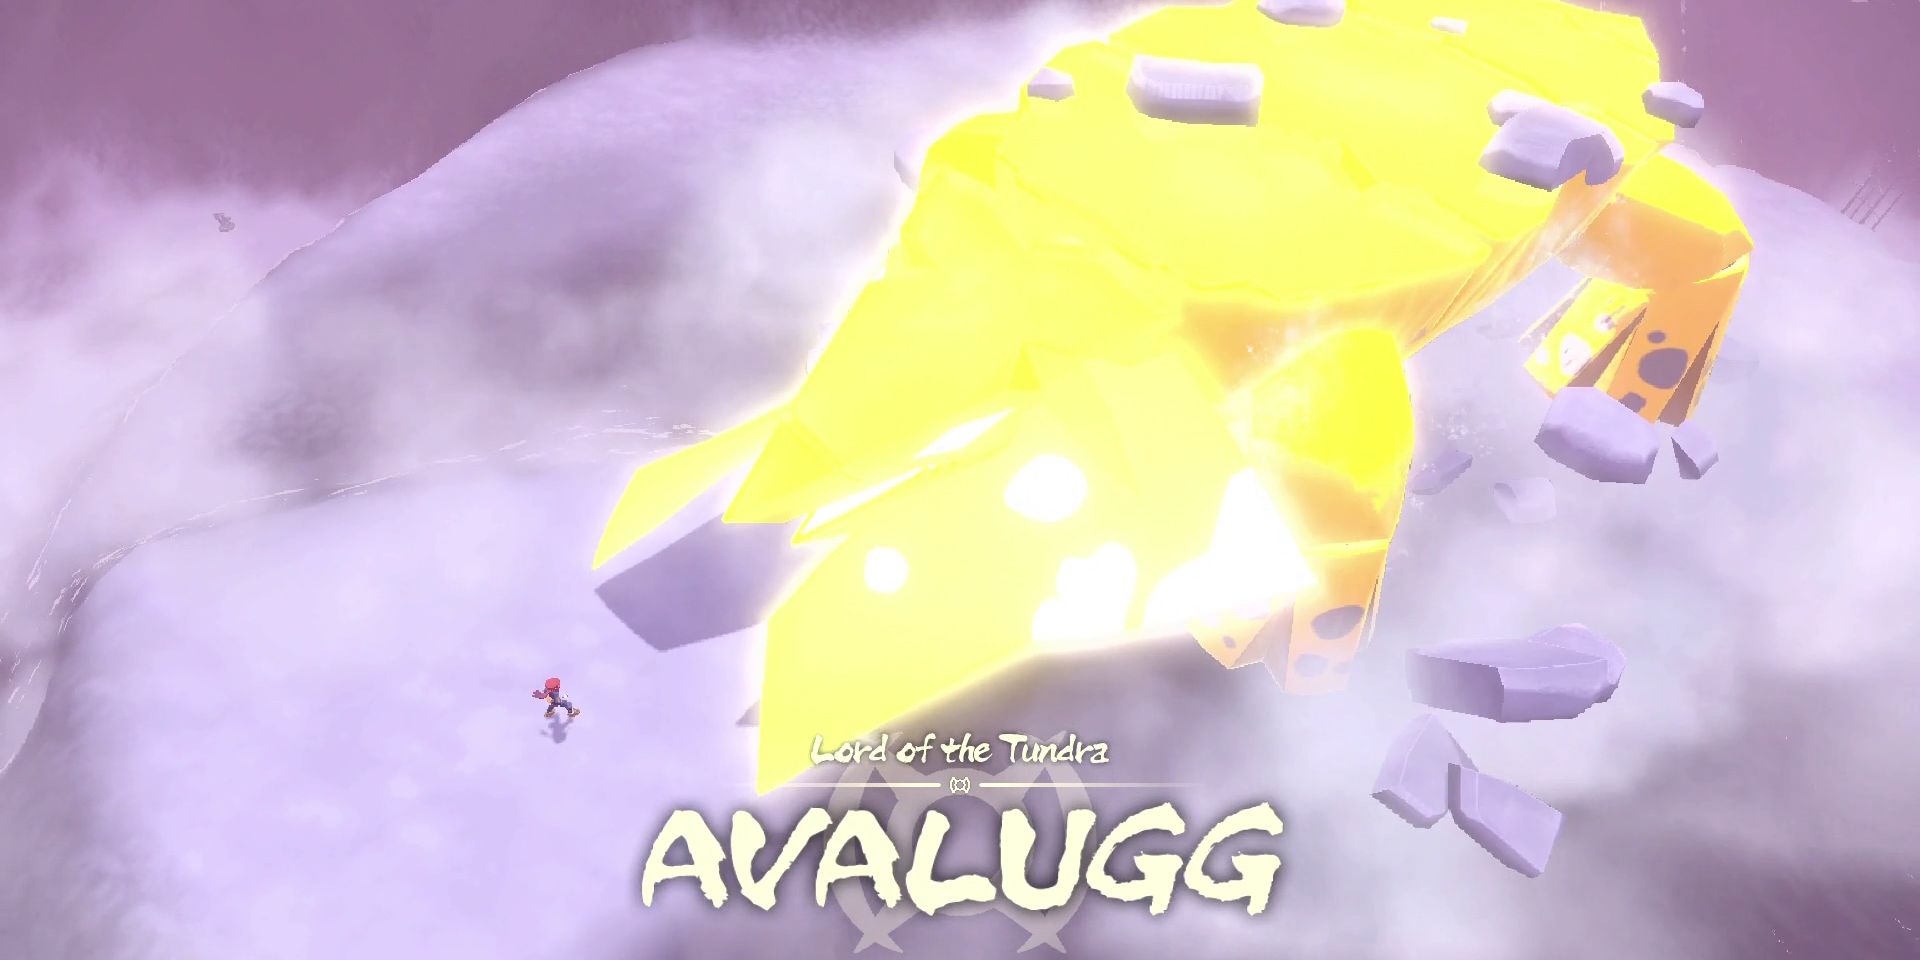 pokemon-legends-arceus-avalugg-boss-guide-01-lord-of-the-tundra